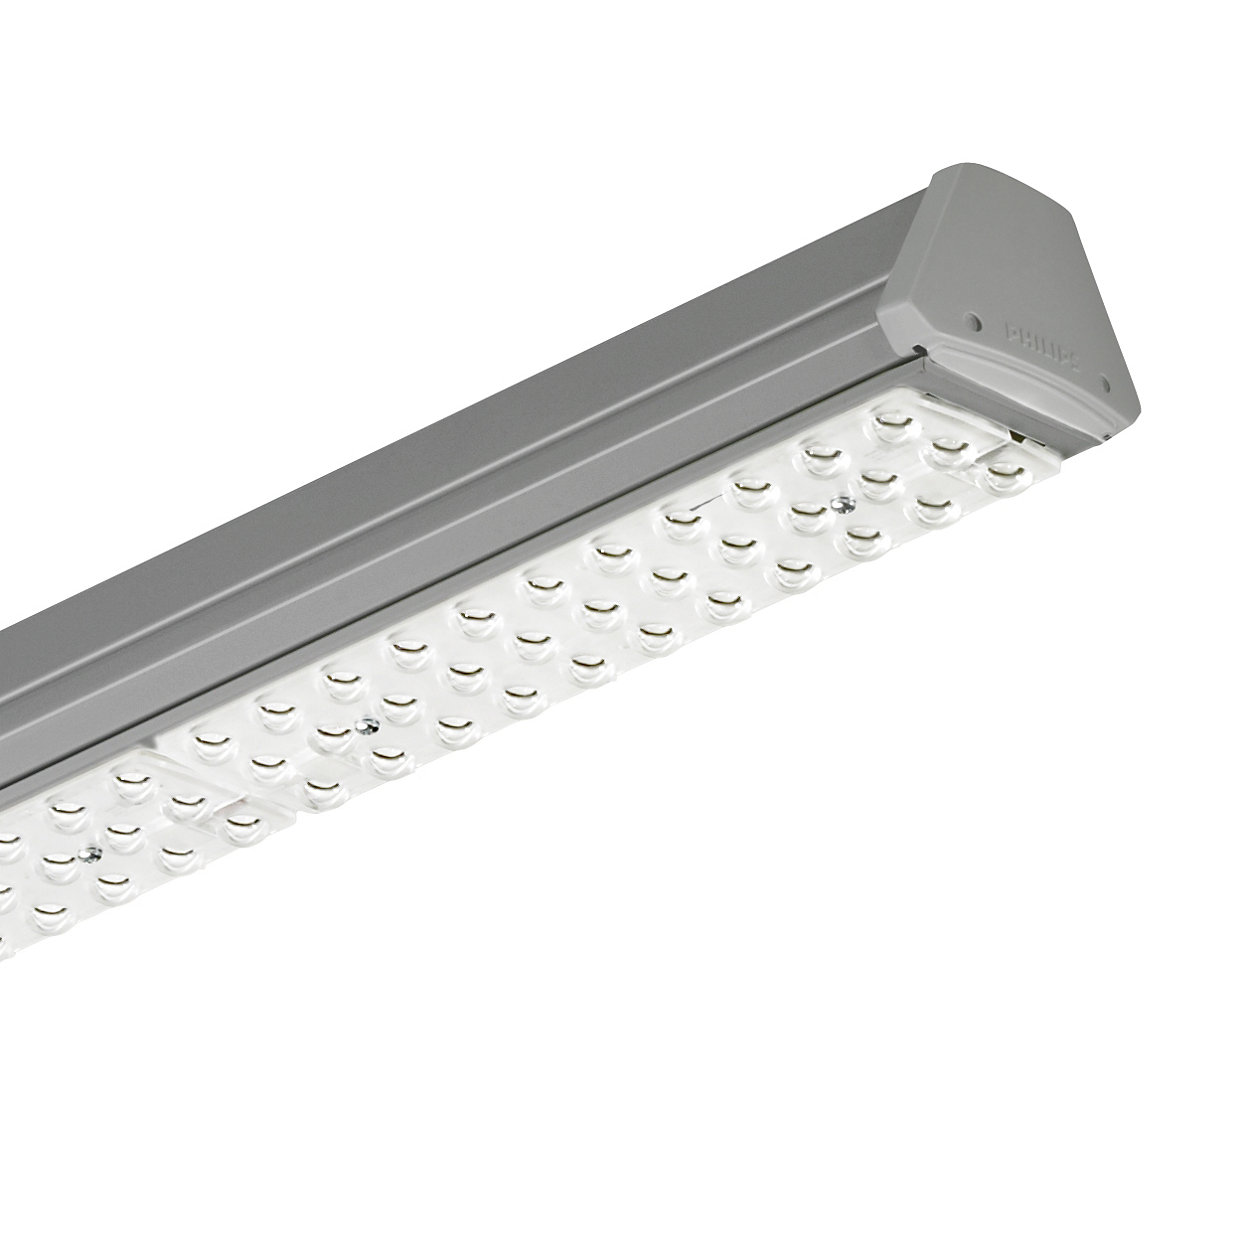 Maxos LED Industry – innovative, flexible solution delivers ideal light output